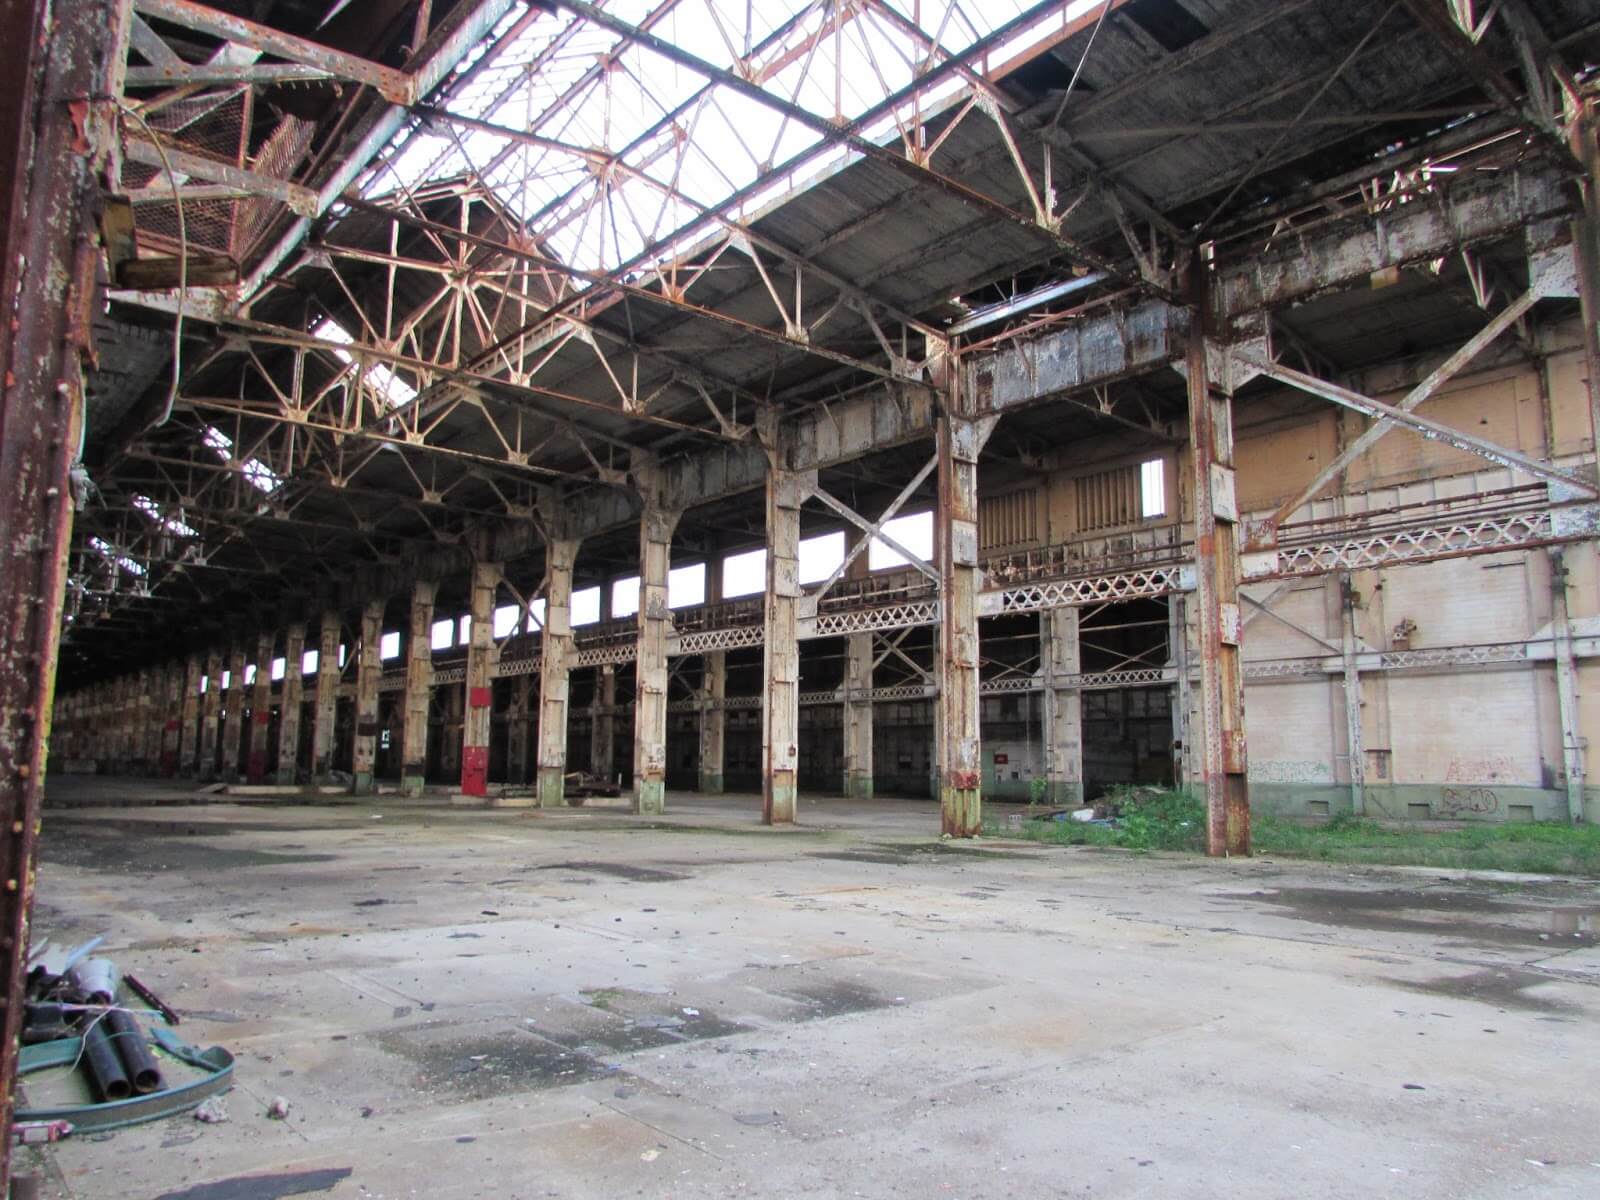 The interior of the mammoth shops from 1907, today, an empty warehouse structure